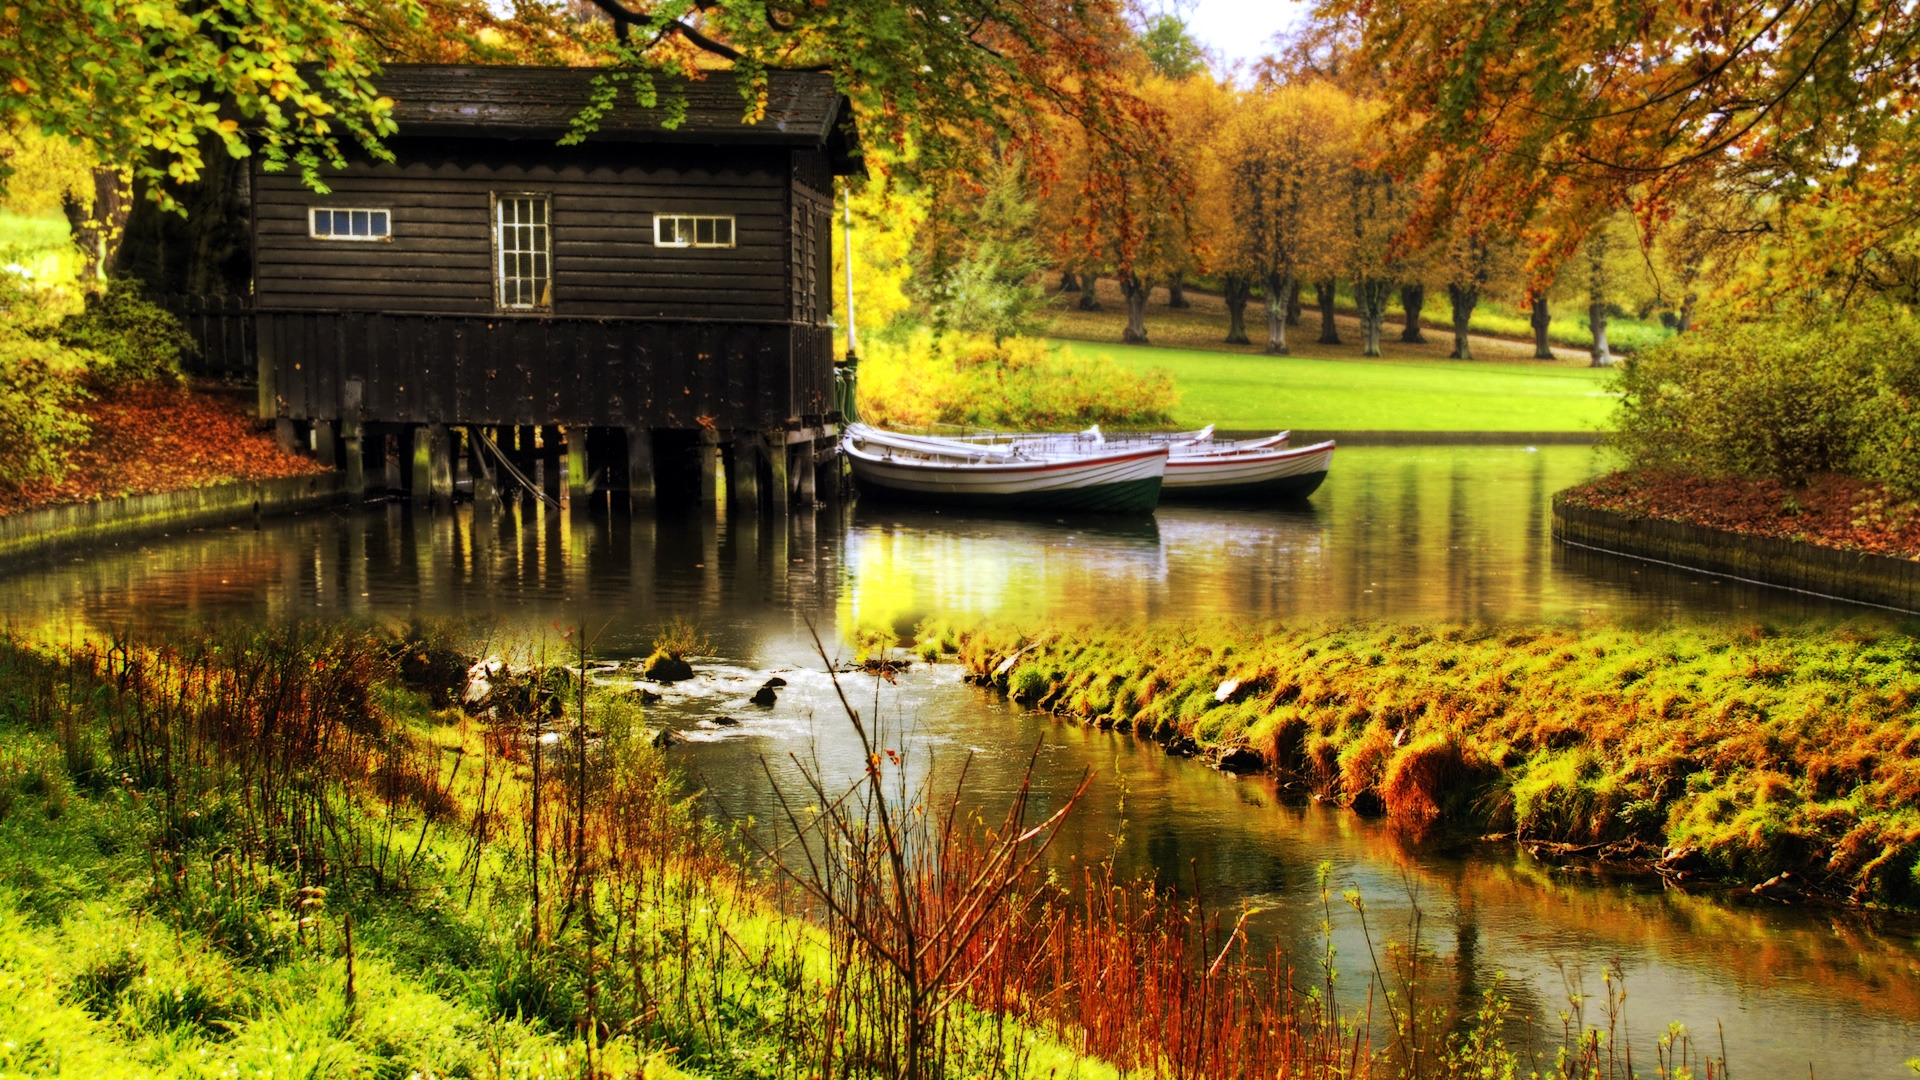 The House on the Lake for 1920 x 1080 HDTV 1080p resolution